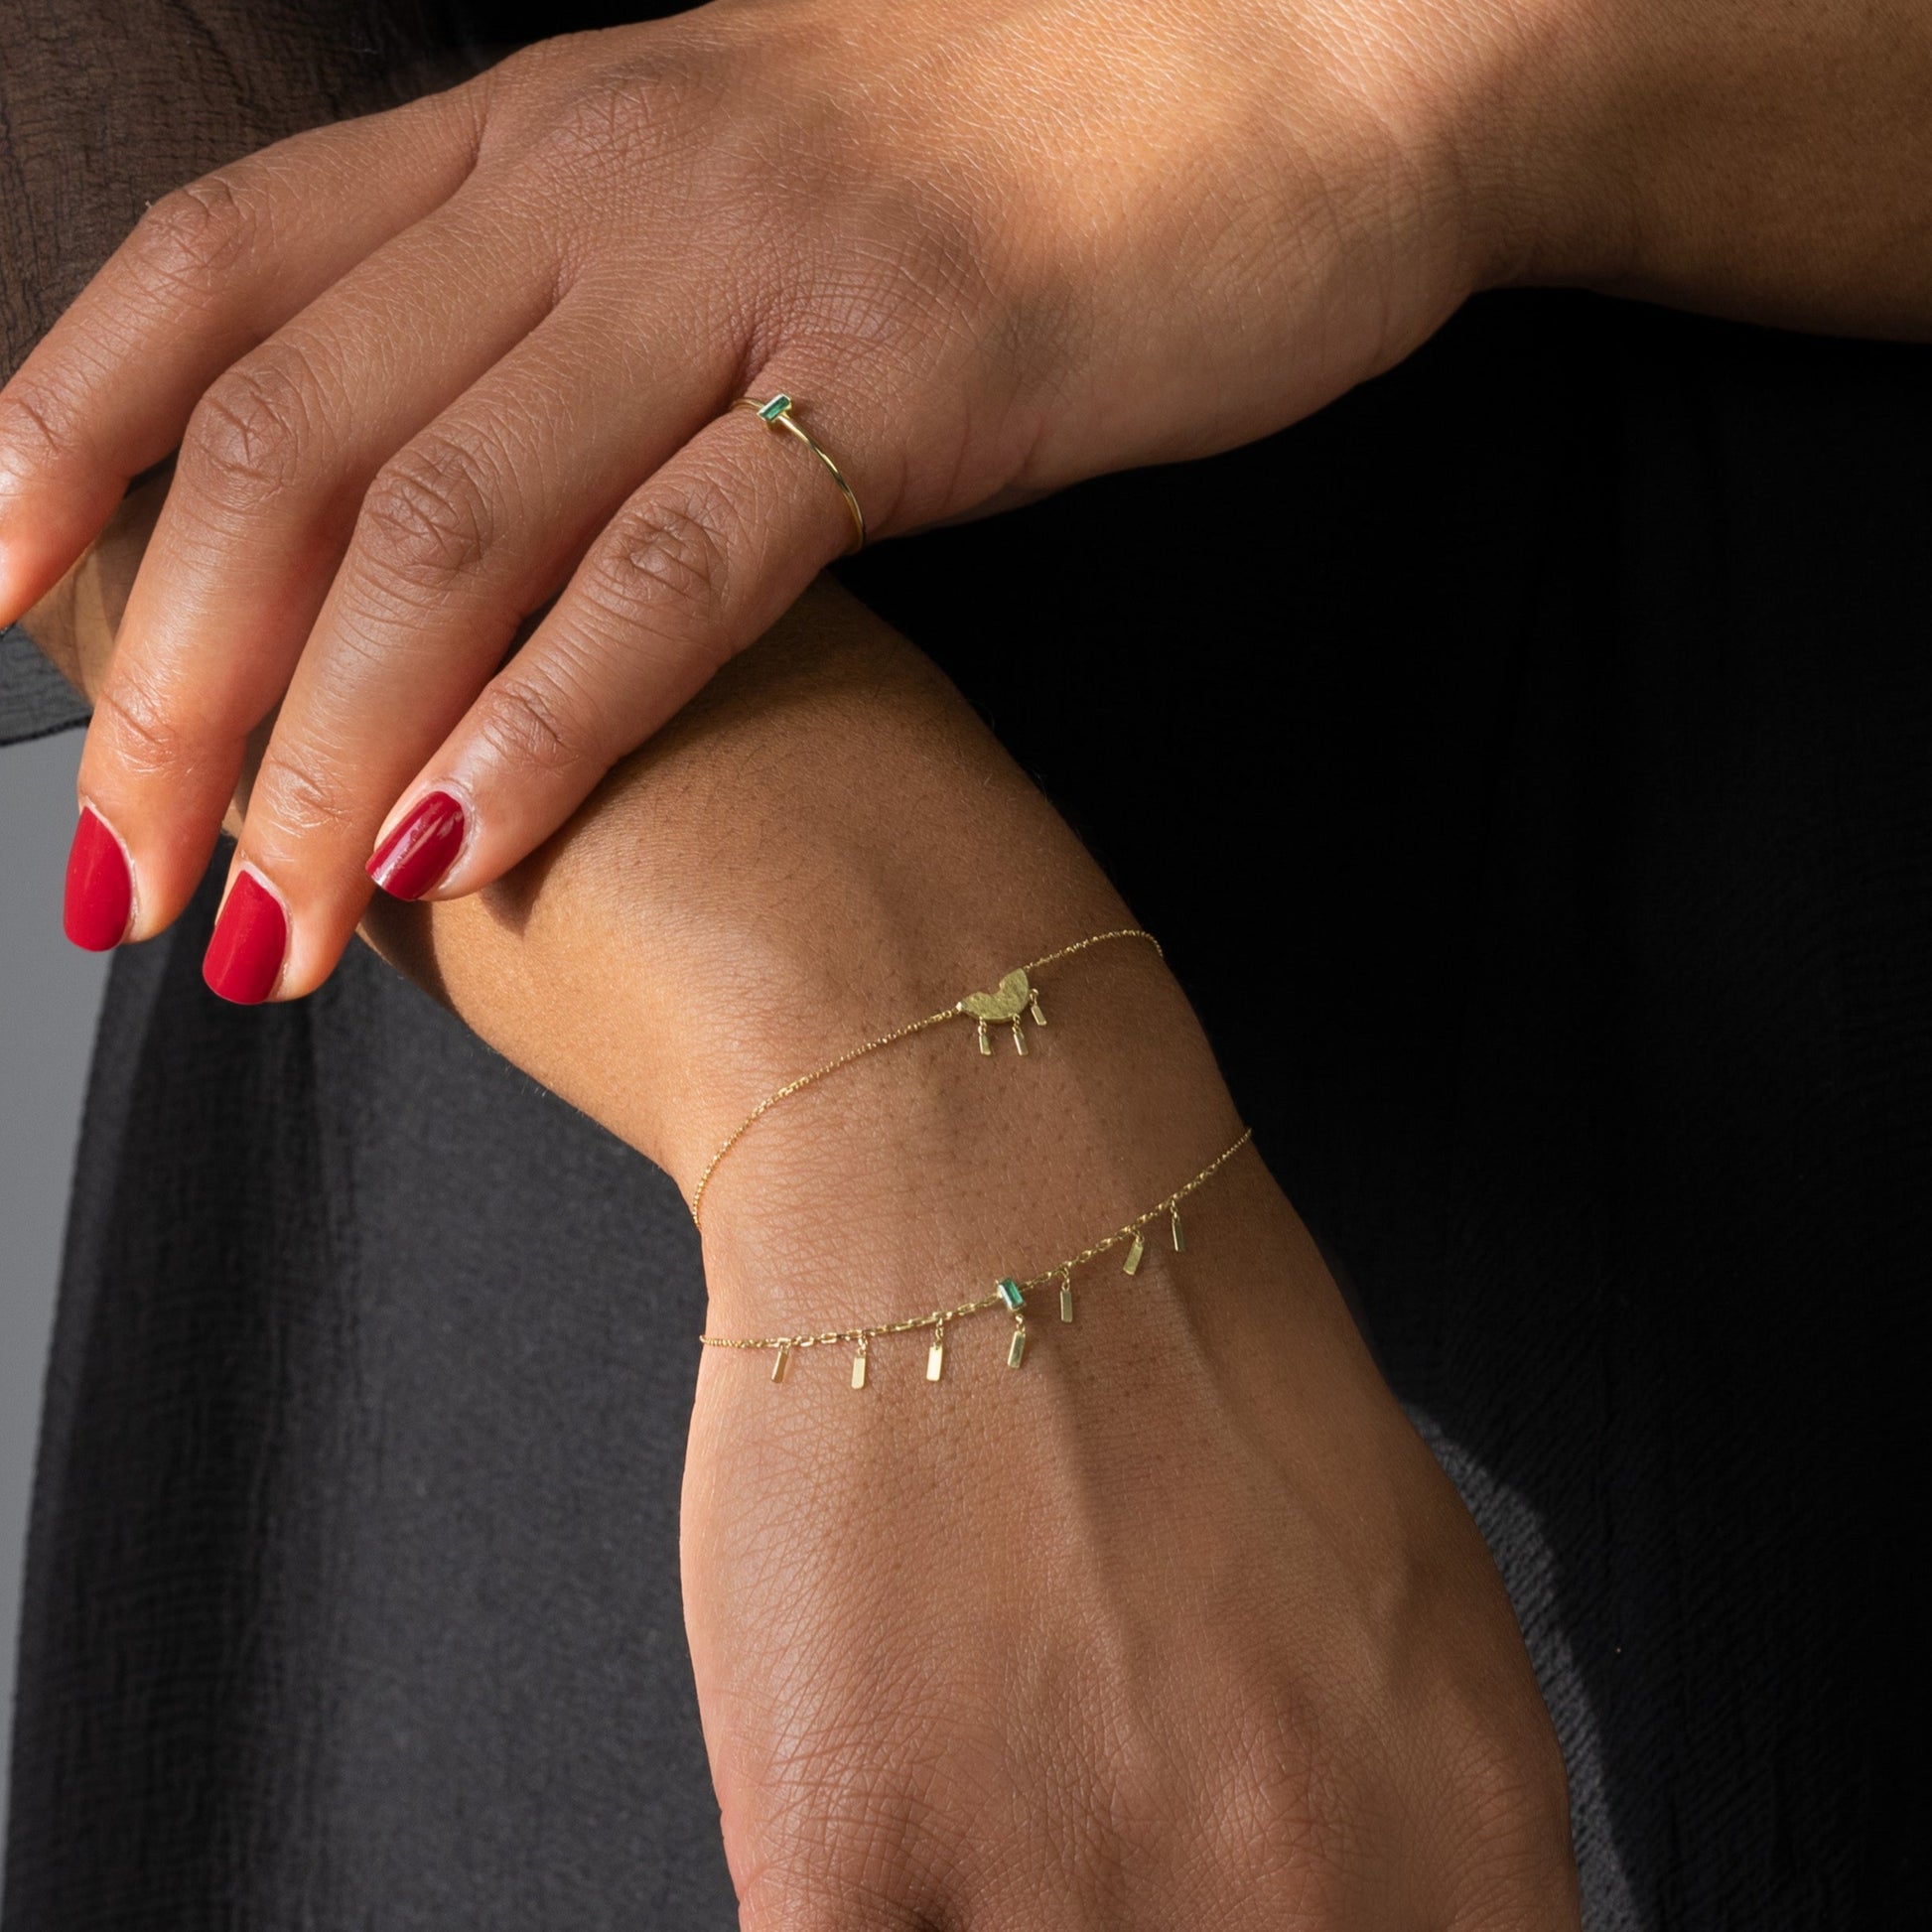 Enchanting 18ct gold curved bar bracelet with 3 charms on model. 